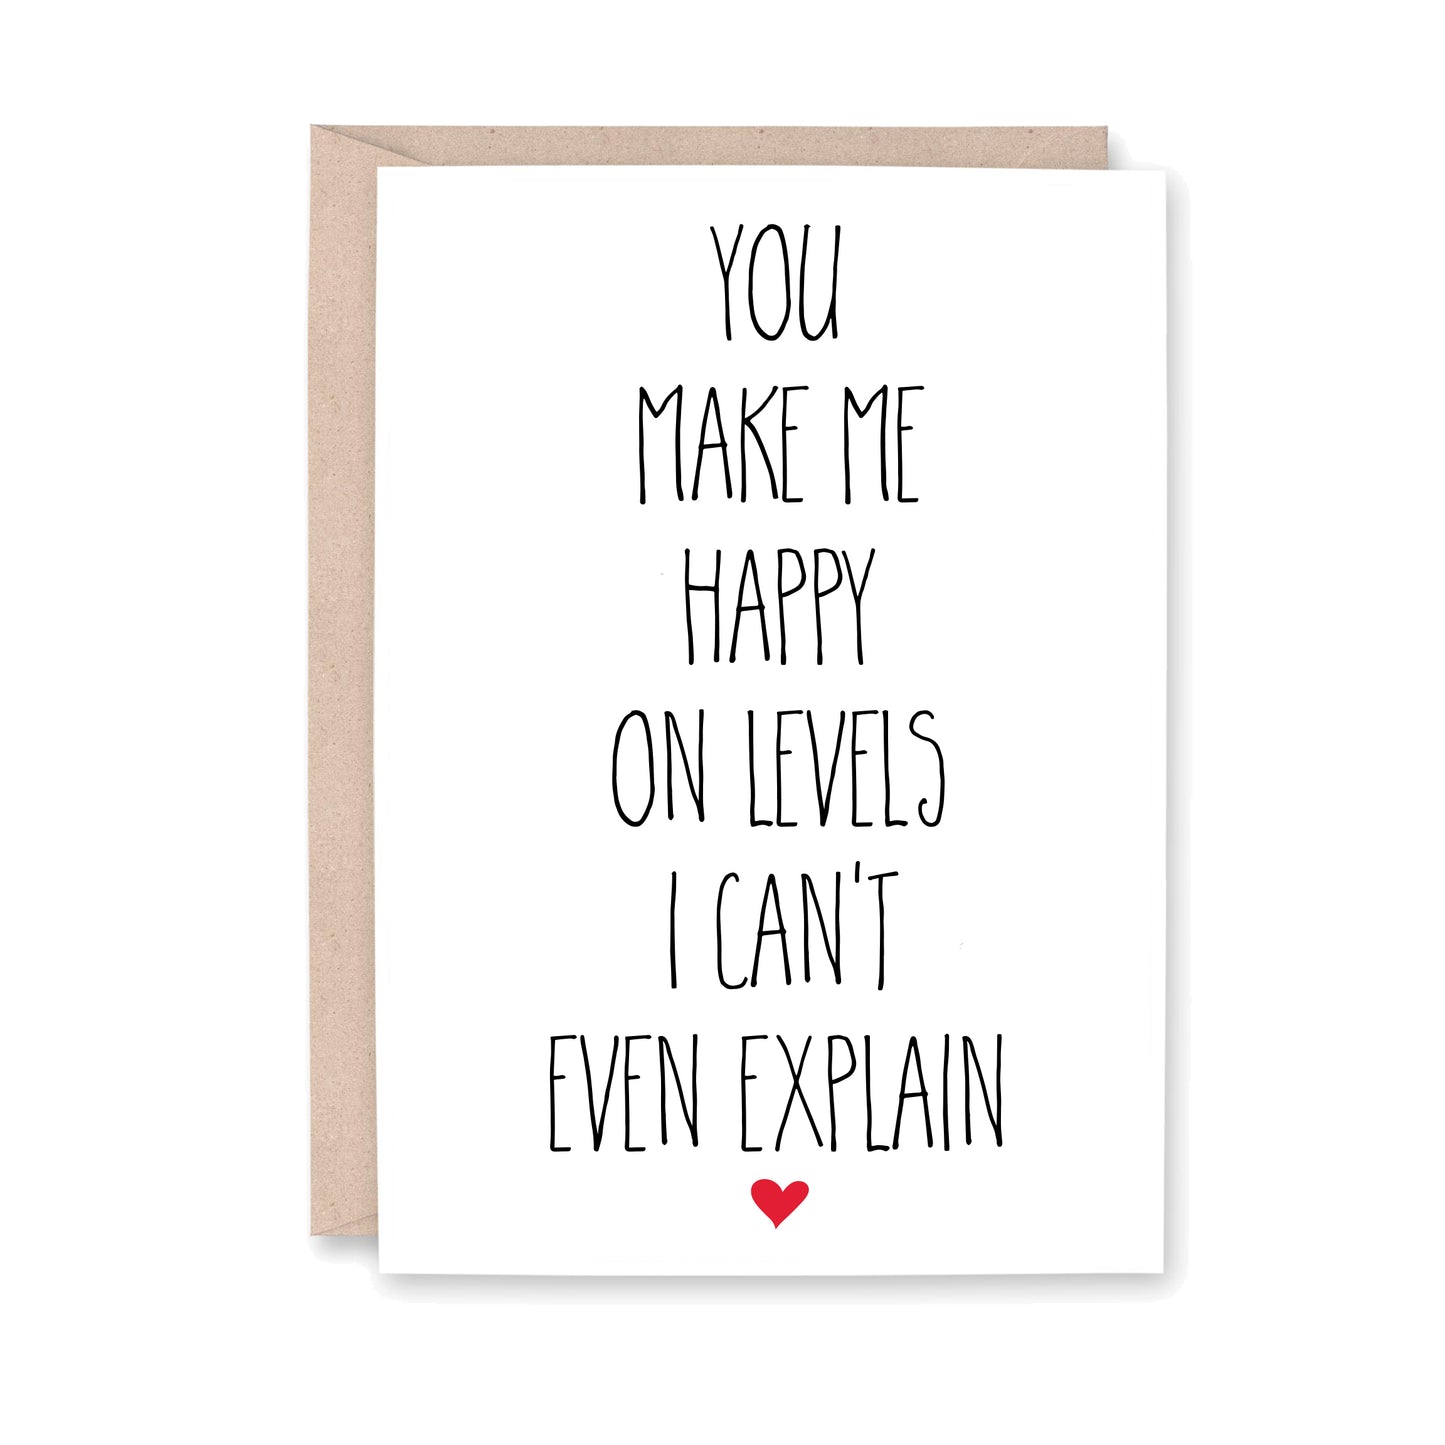 Greeting card with orange text that says "you make me happy on levels I can't even explain"